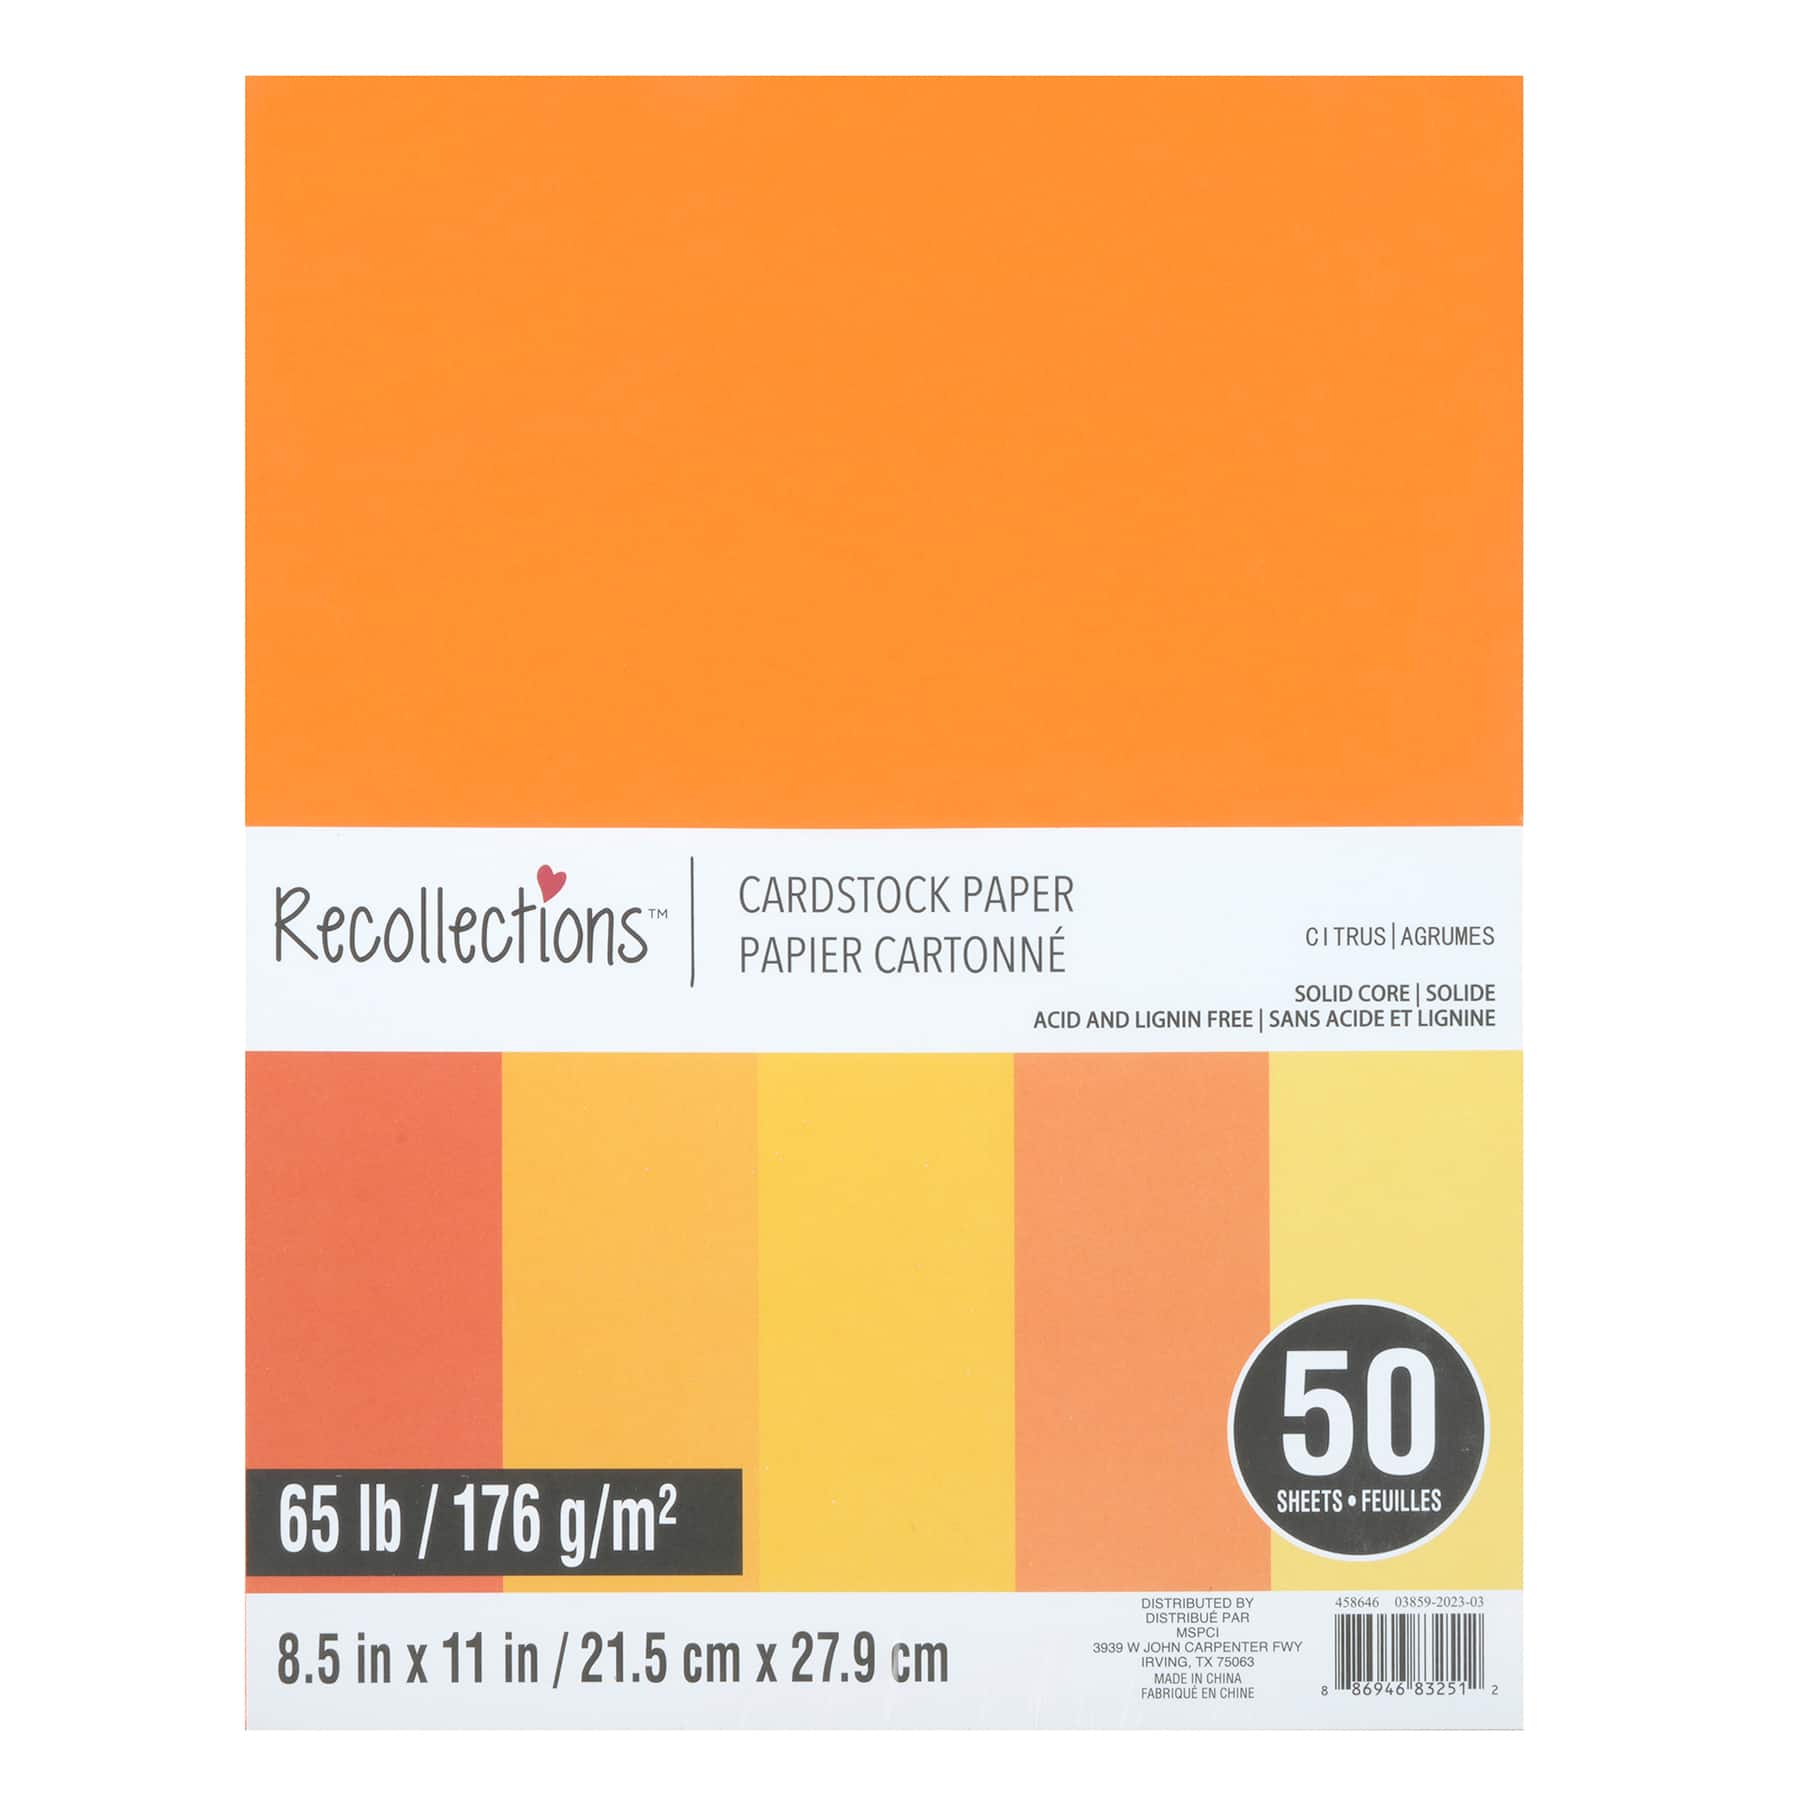 6 Packs: 100 ct. (600 total) Black Heavyweight 8.5 x 11 Cardstock Paper by  Recollections™